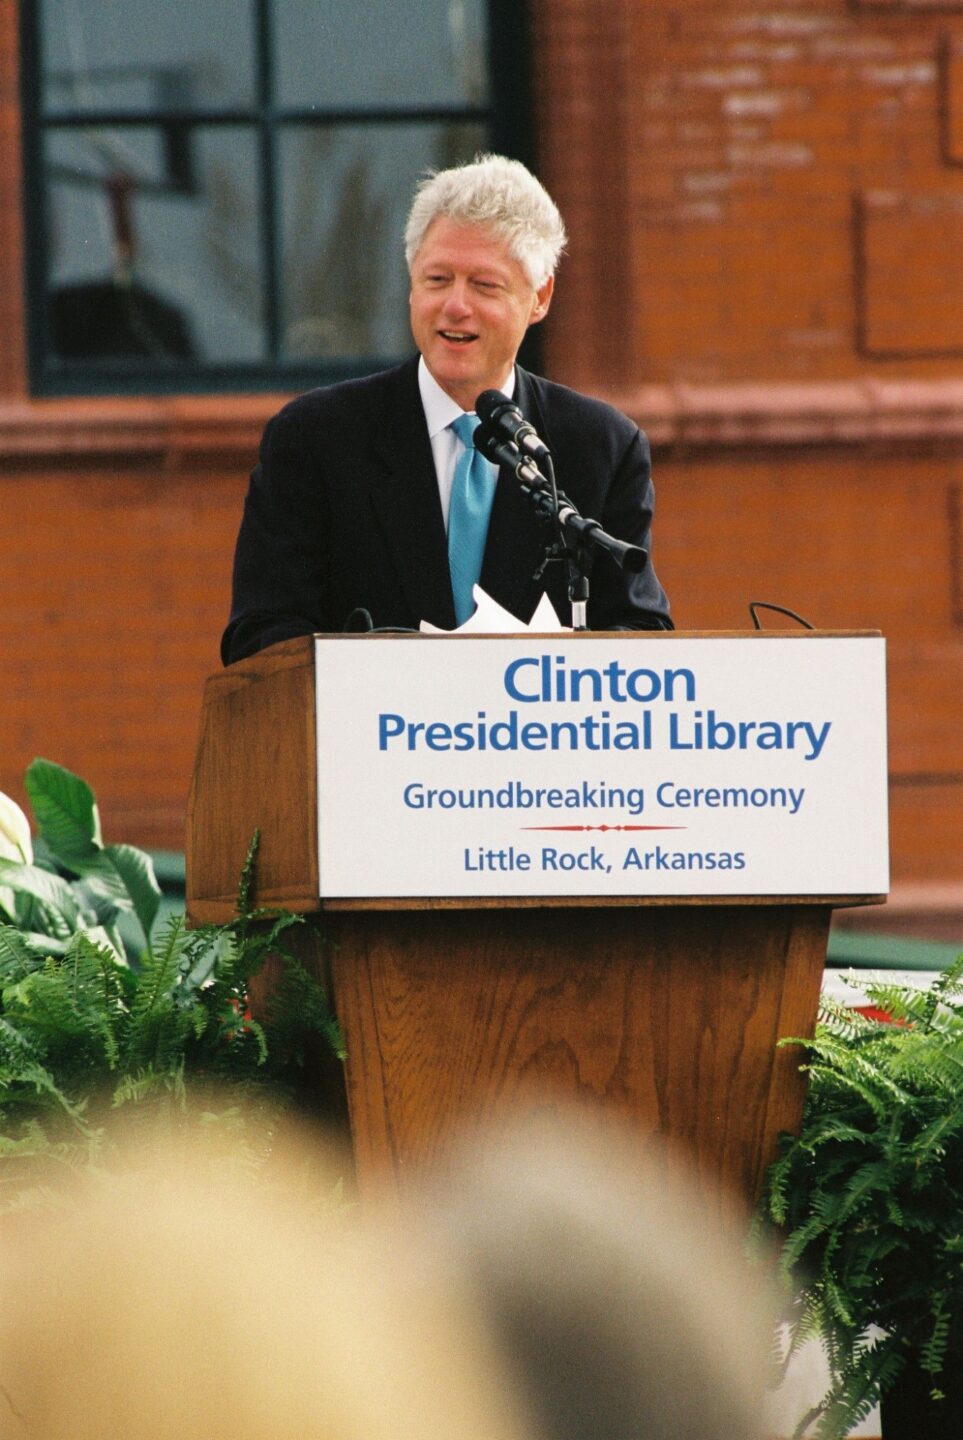 President Clinton speaks behind a podium that says "Clinton Presidential Library Groundbreaking Ceremony"